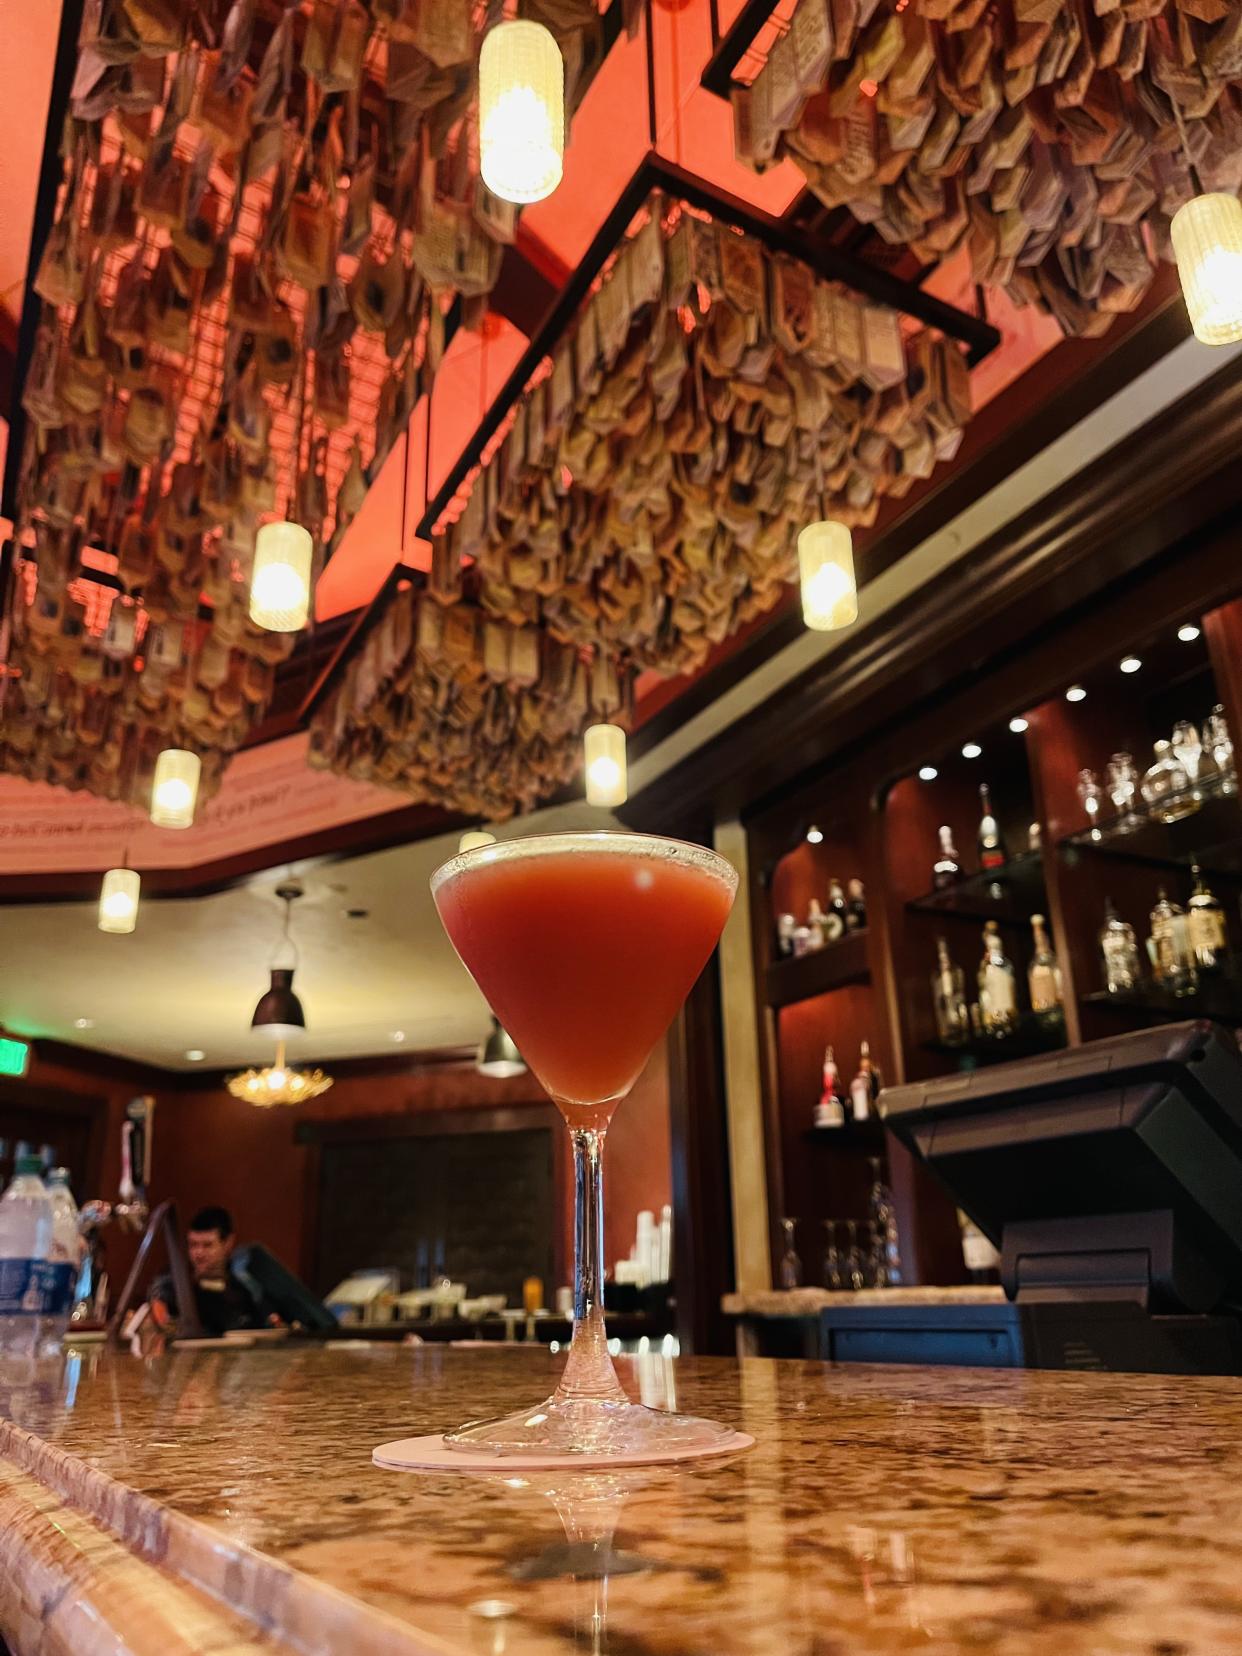 Nomad Lounge at Disney's Animal Kingdom is the perfect spot to cool off and have a specialty cocktail. (Photo: Carly Caramanna)